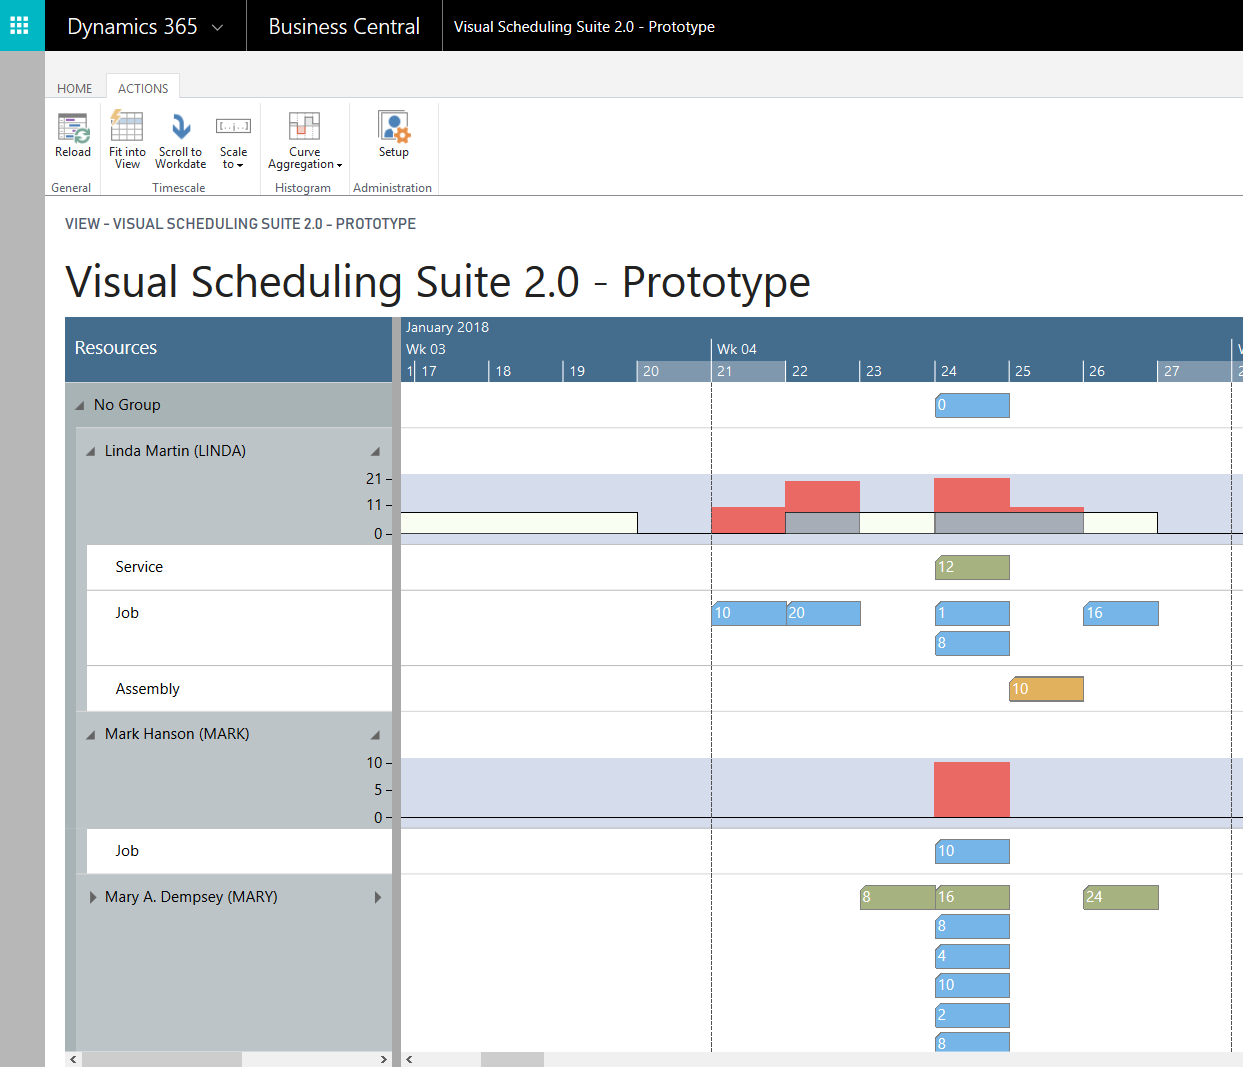 Visual Scheduling Suite 2.0